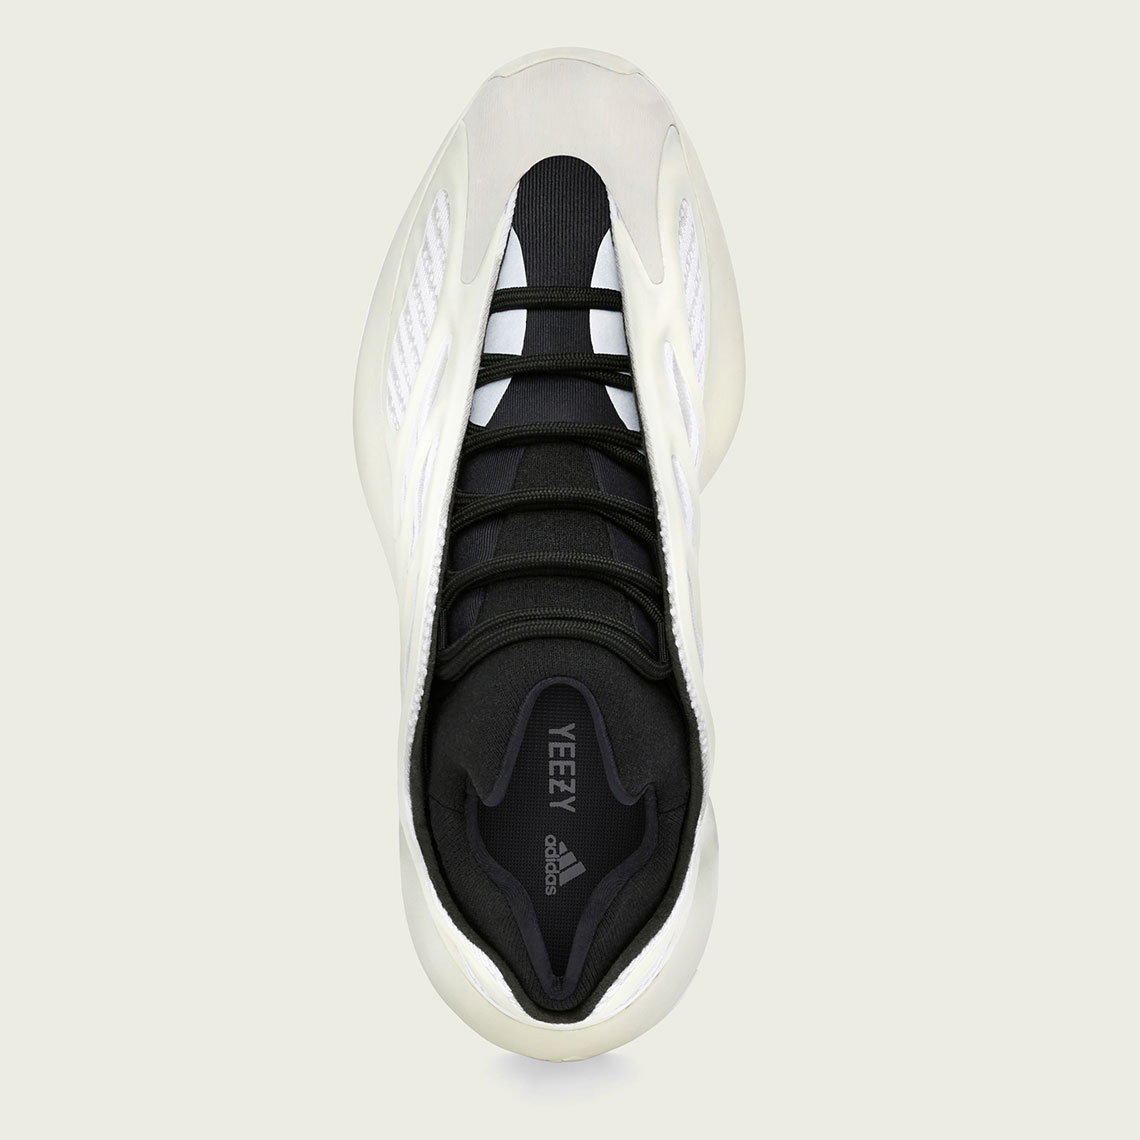 adidas-yeezy-700-v3-release-date-4